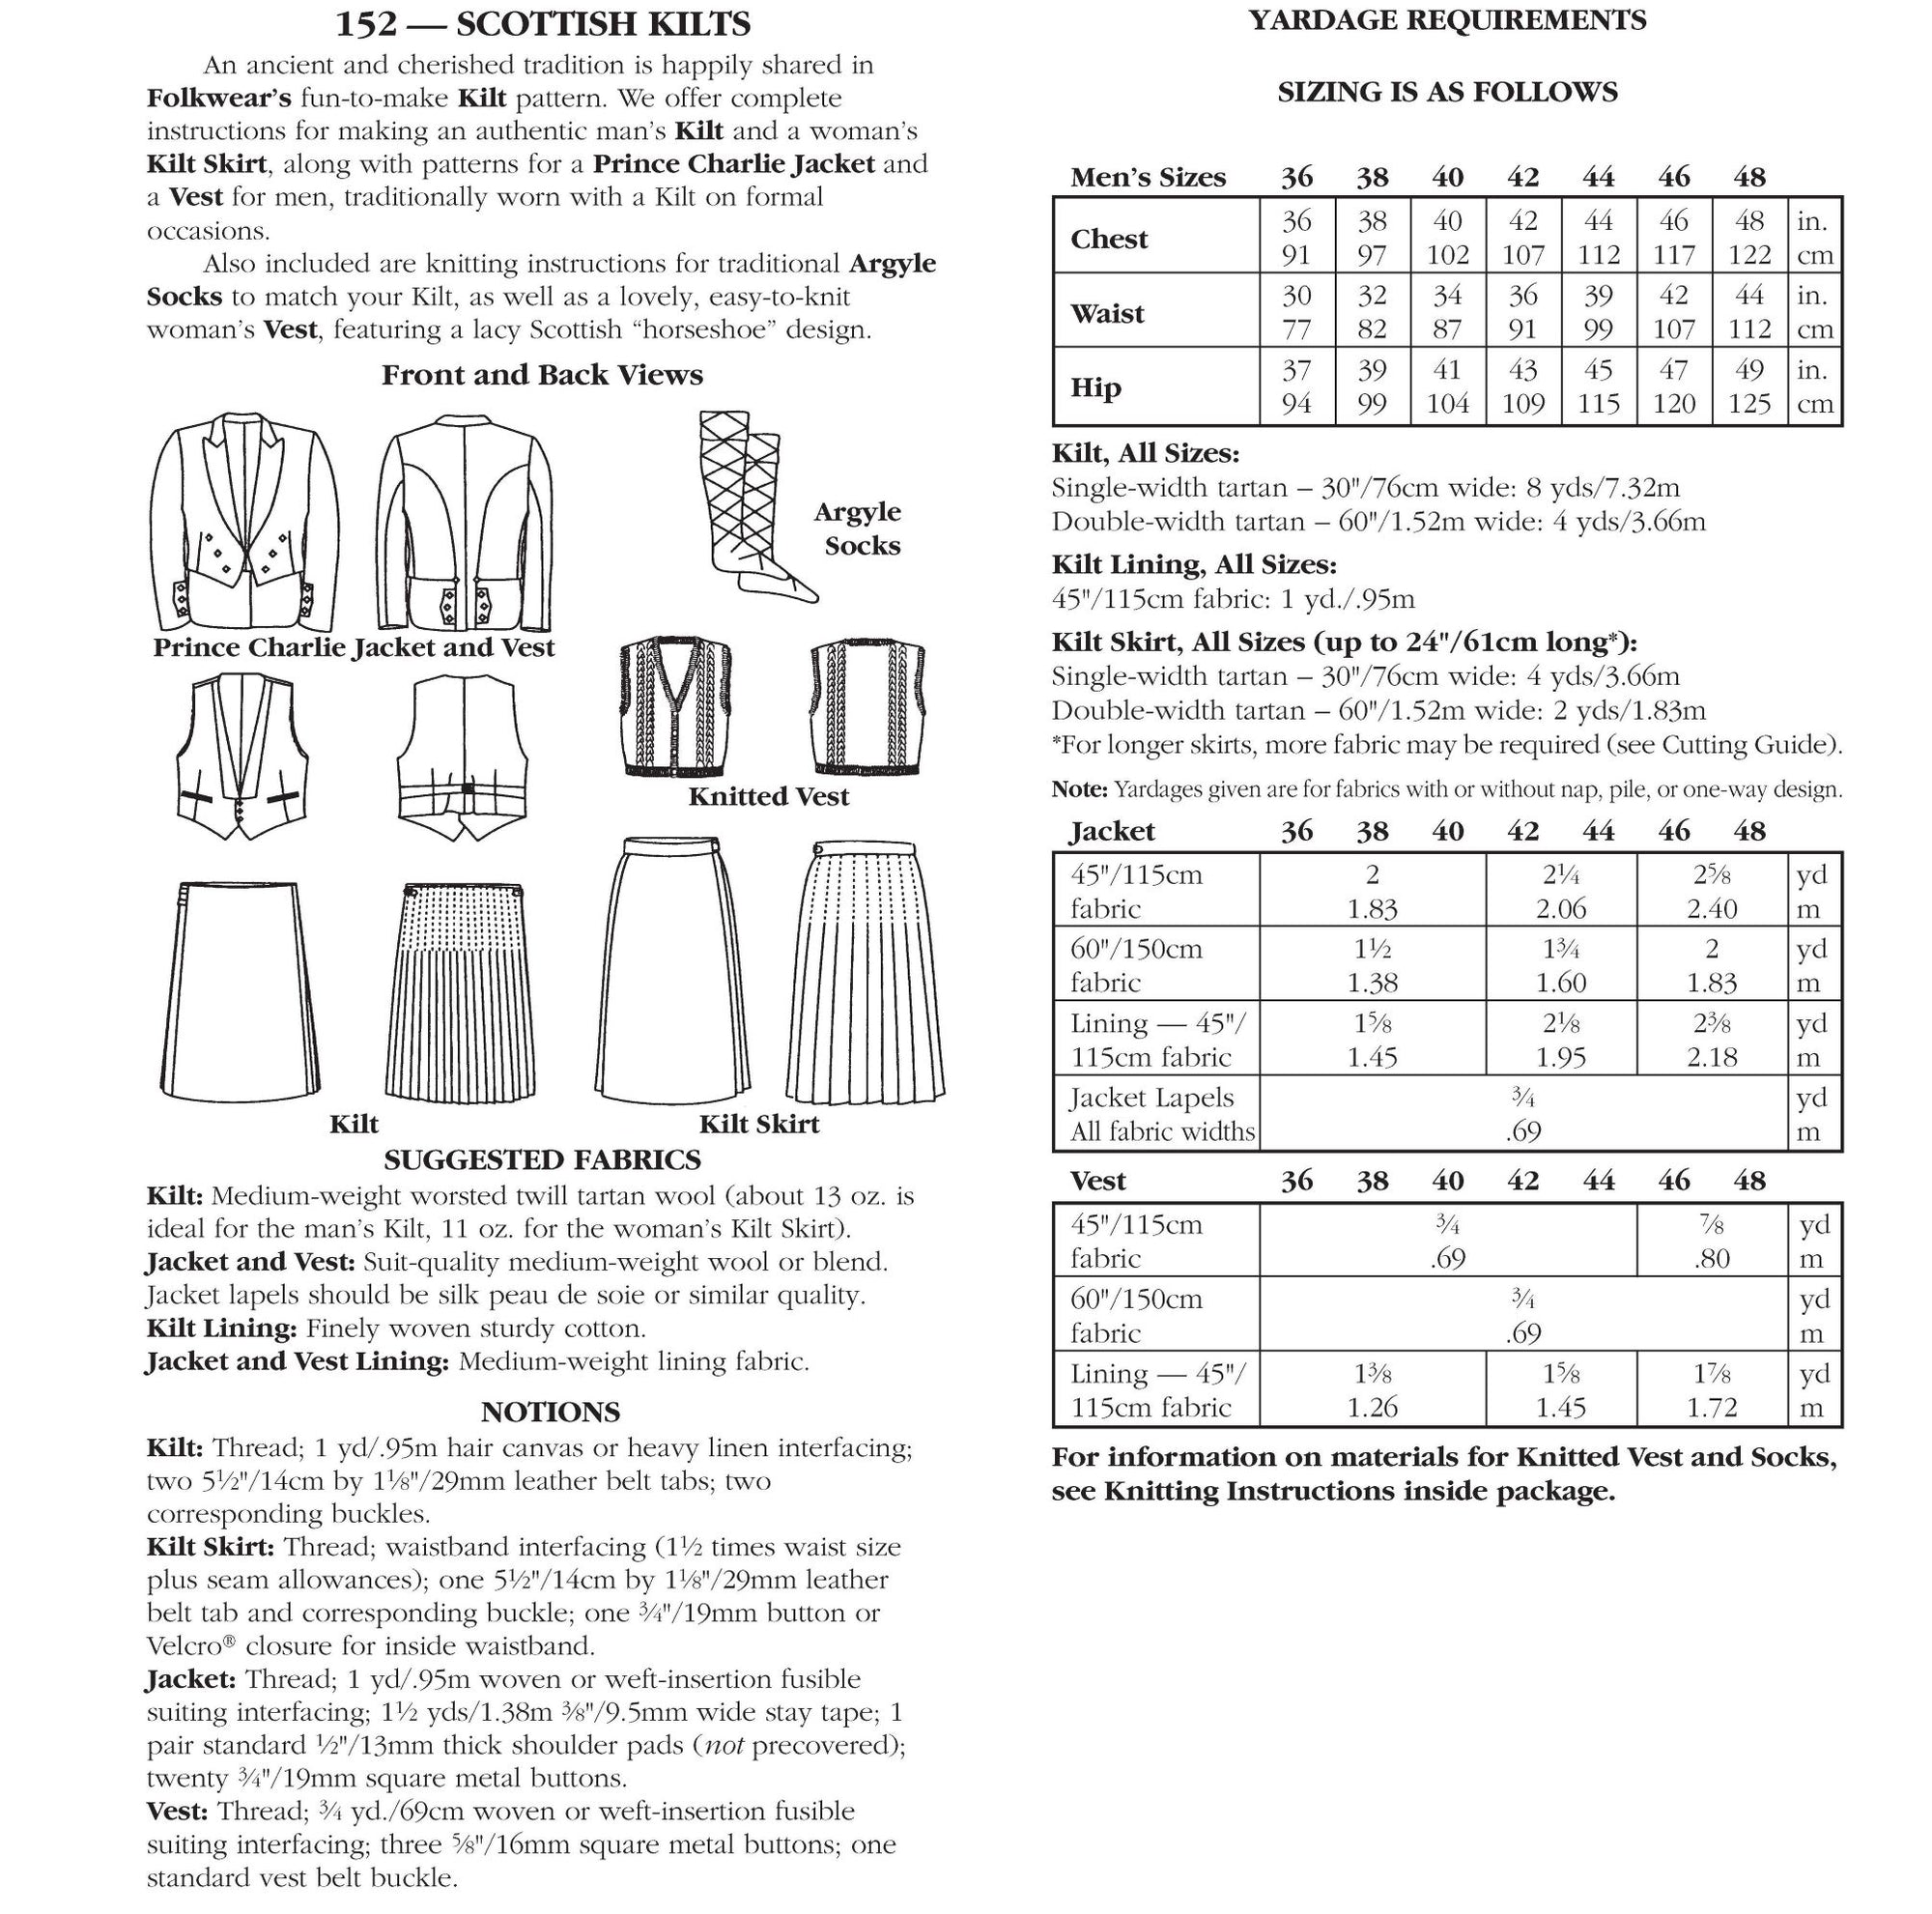 Photo of back of pattern cover. Cover shows description of pattern, views, fabric suggestions, and size and yardage charts.